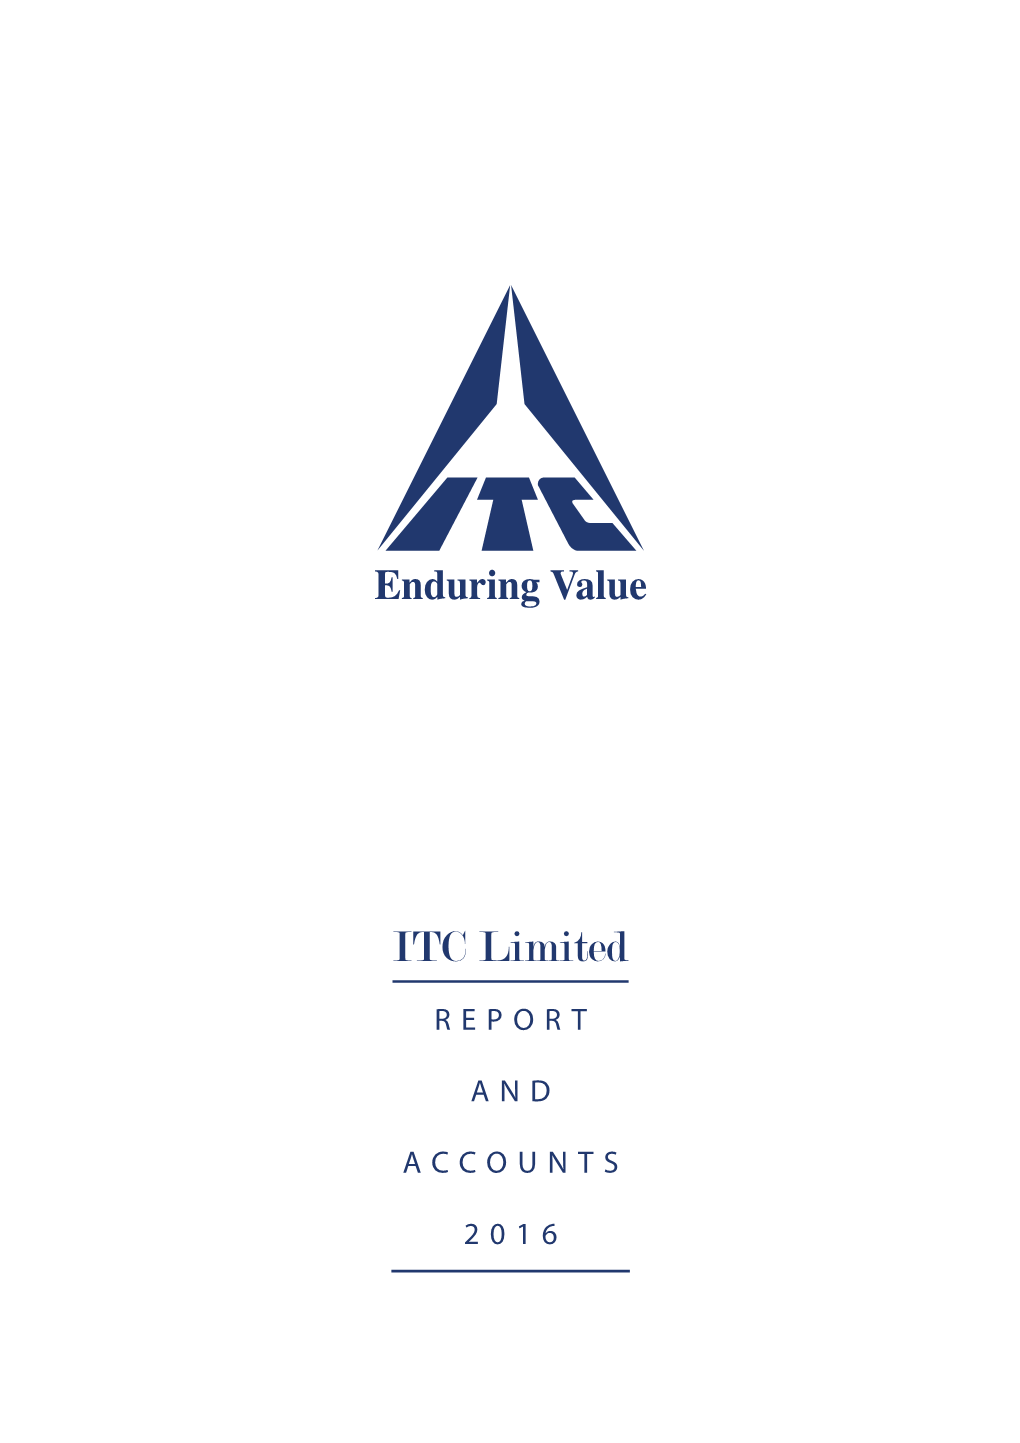 Annual Report Is Sent to Every Shareholder at On-Rpt.Aspx